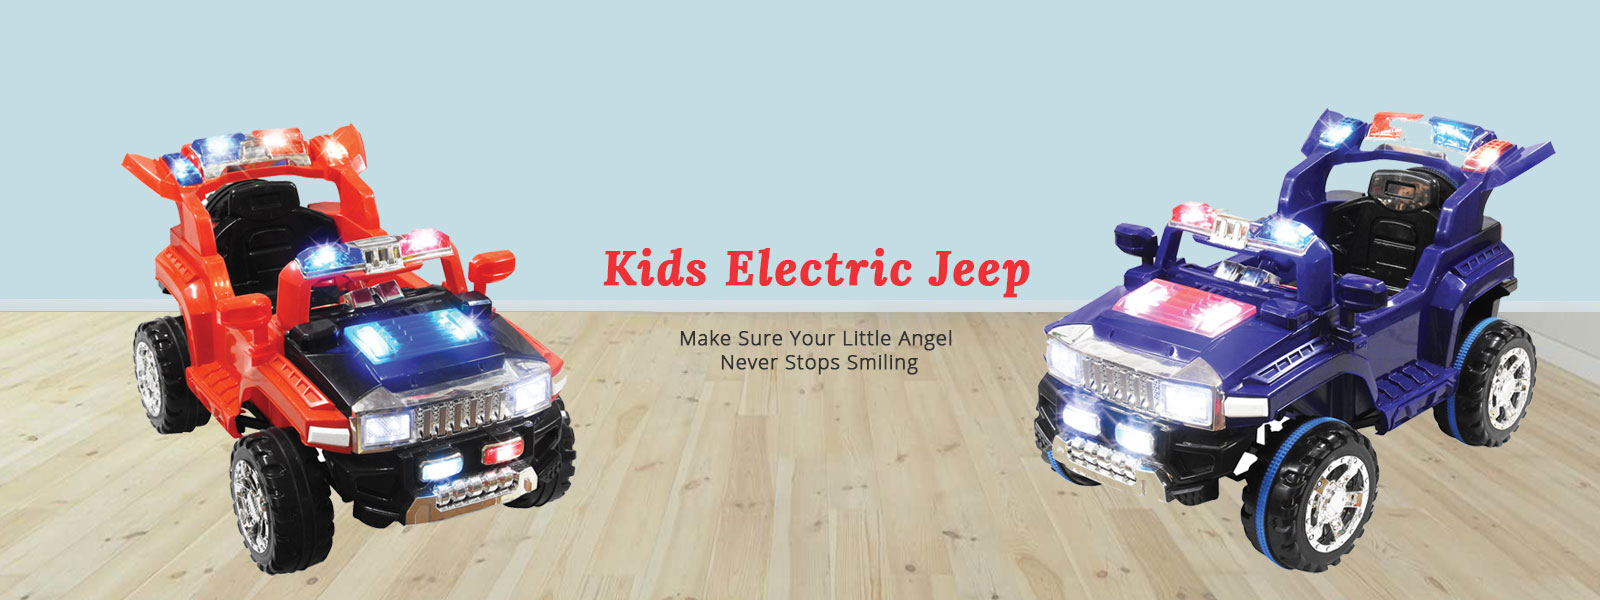 Kids Electric Jeep Manufacturers in Allahabad